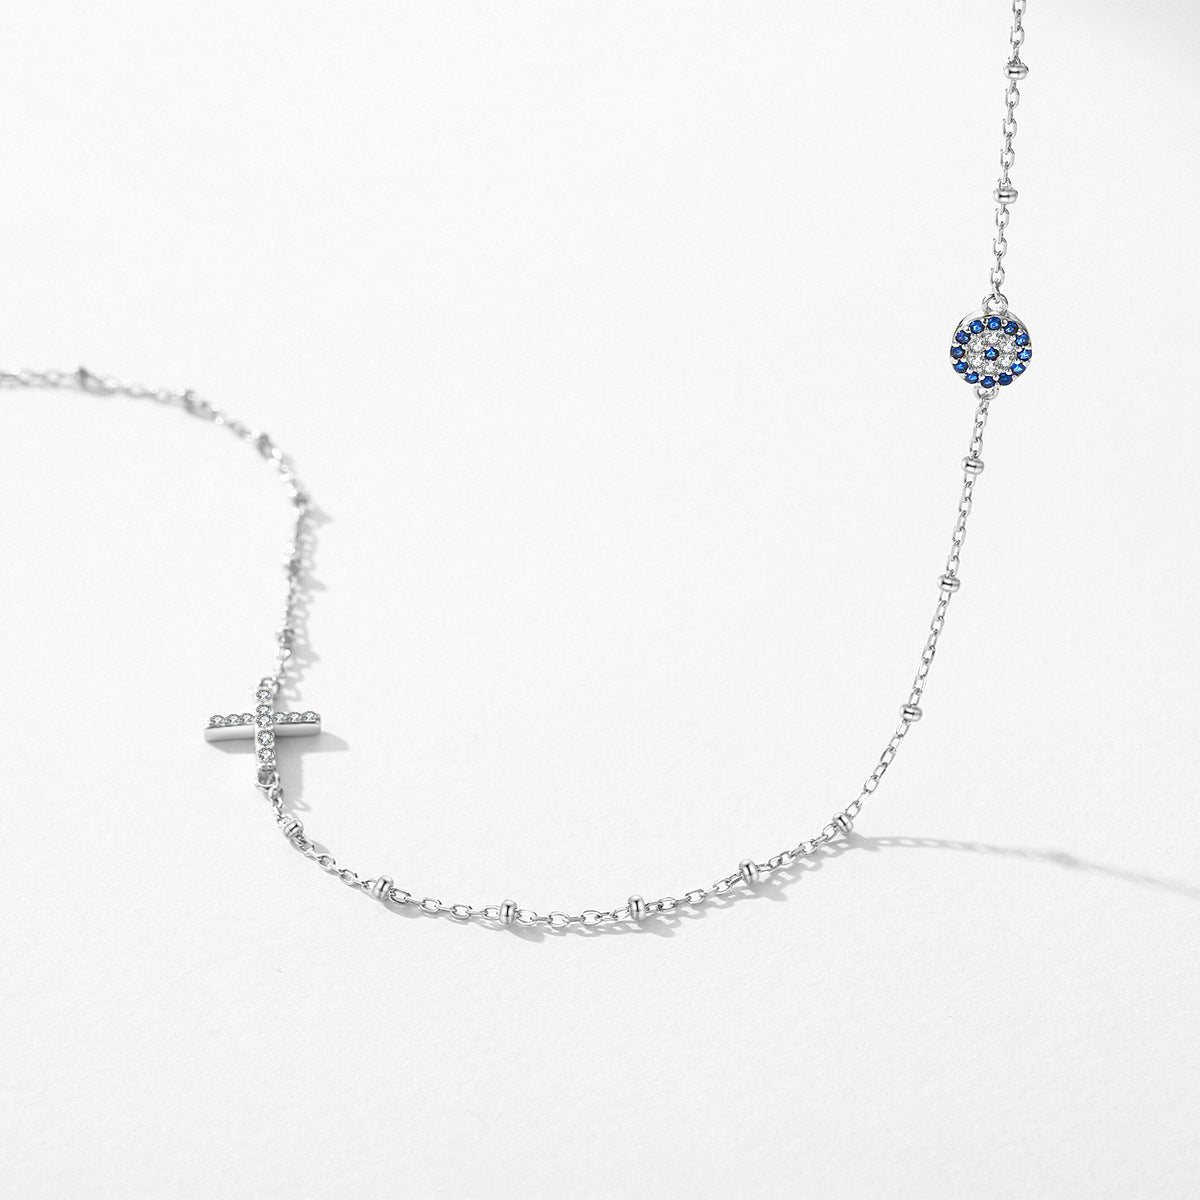 Chic Sterling Silver Blue Eye Necklace with Cross and Beaded Collarbone Chain